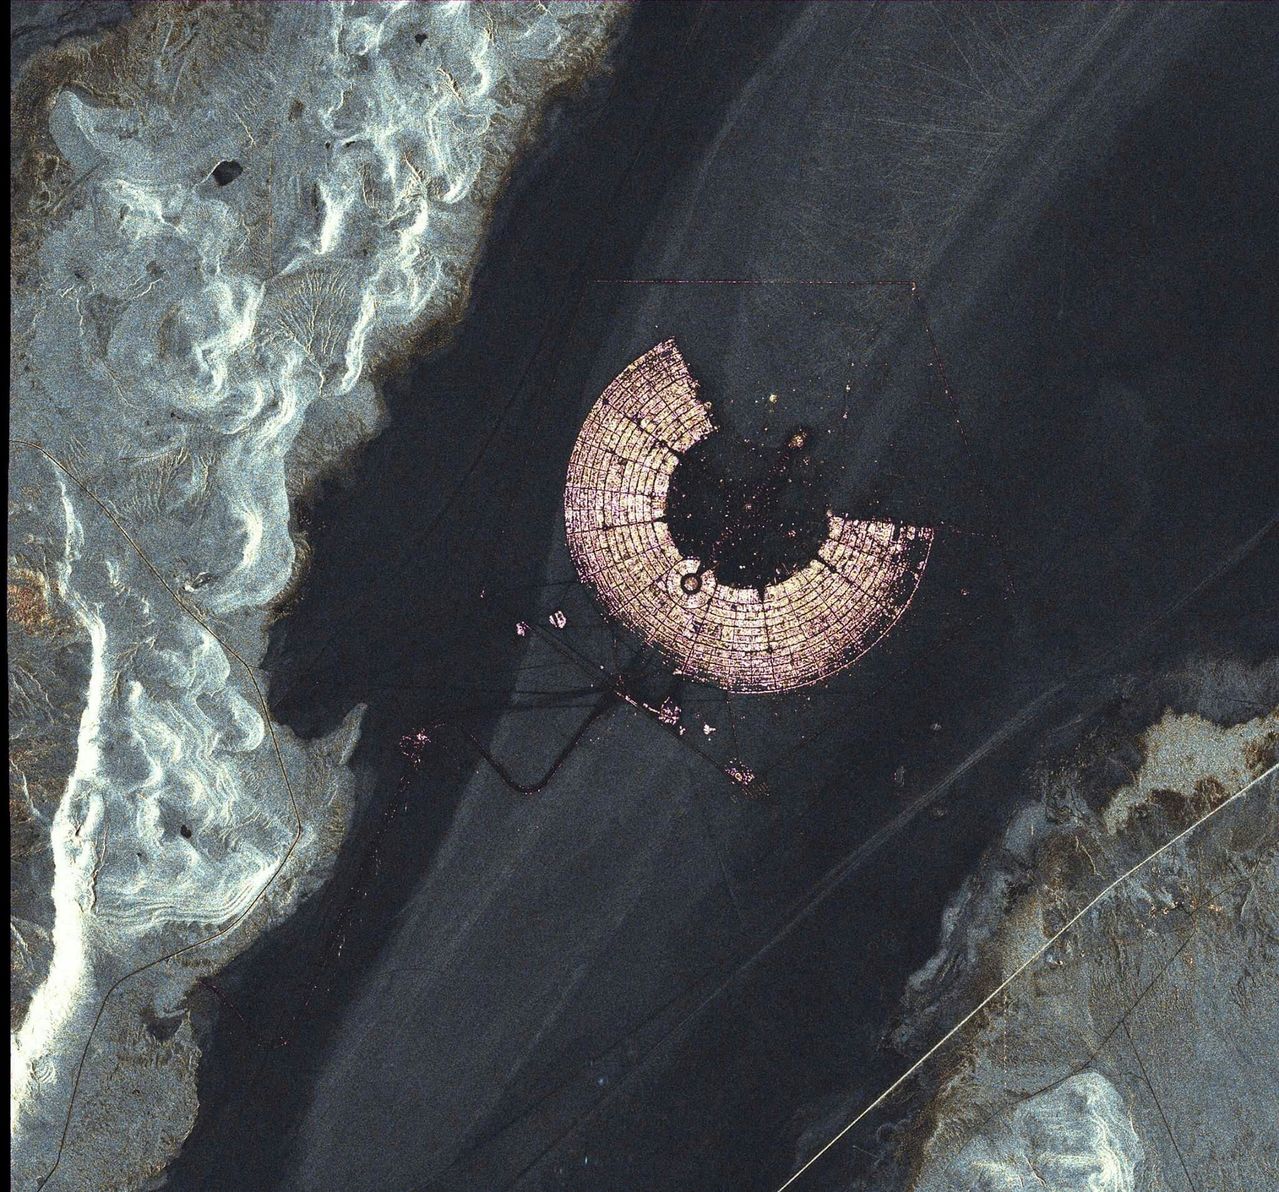 Aerial view of Burning Man taken from the International Space Station